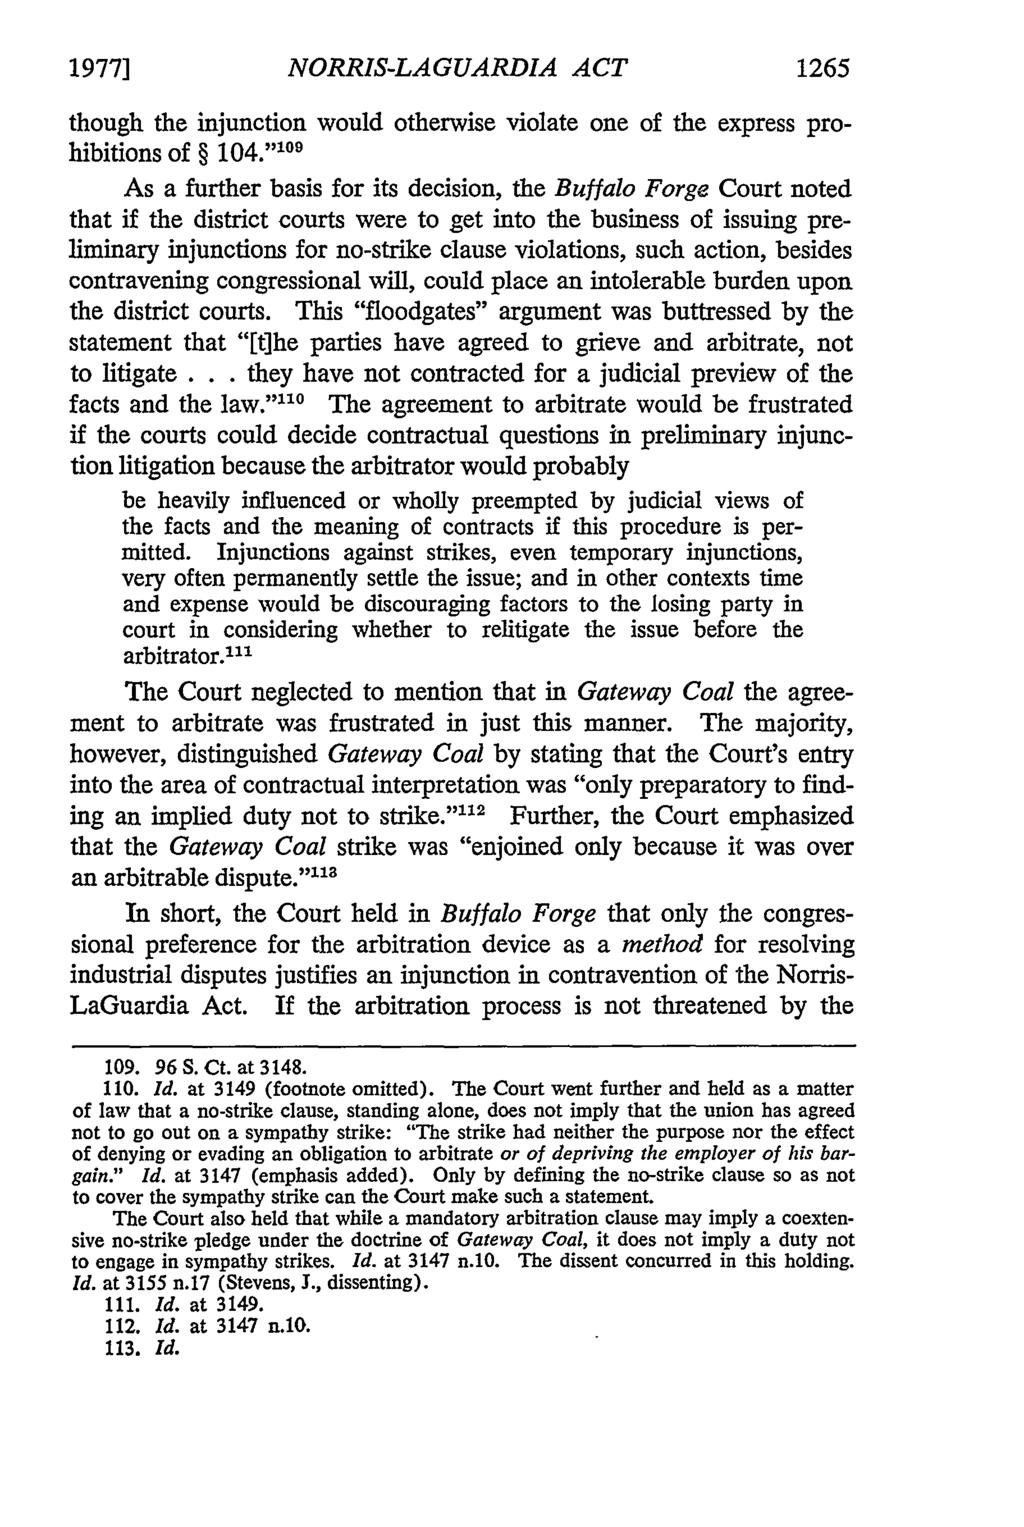 1977] NORRIS-LAGUARDIA ACT 1265 though the injunction would otherwise violate one of the express prohibitions of 104.